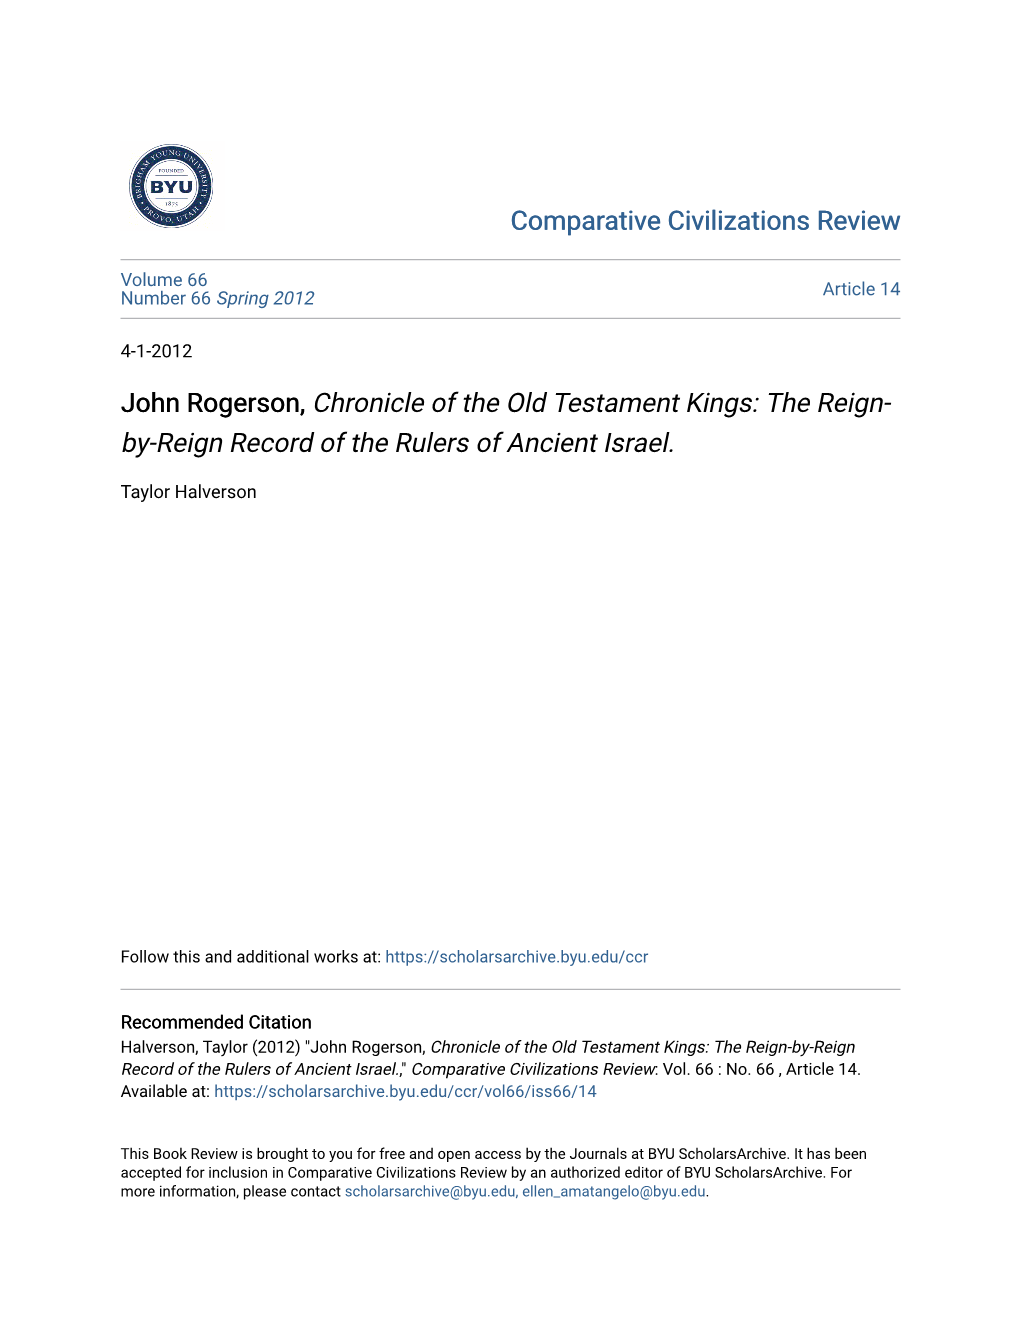 John Rogerson, Chronicle of the Old Testament Kings: the Reign- By-Reign Record of the Rulers of Ancient Israel